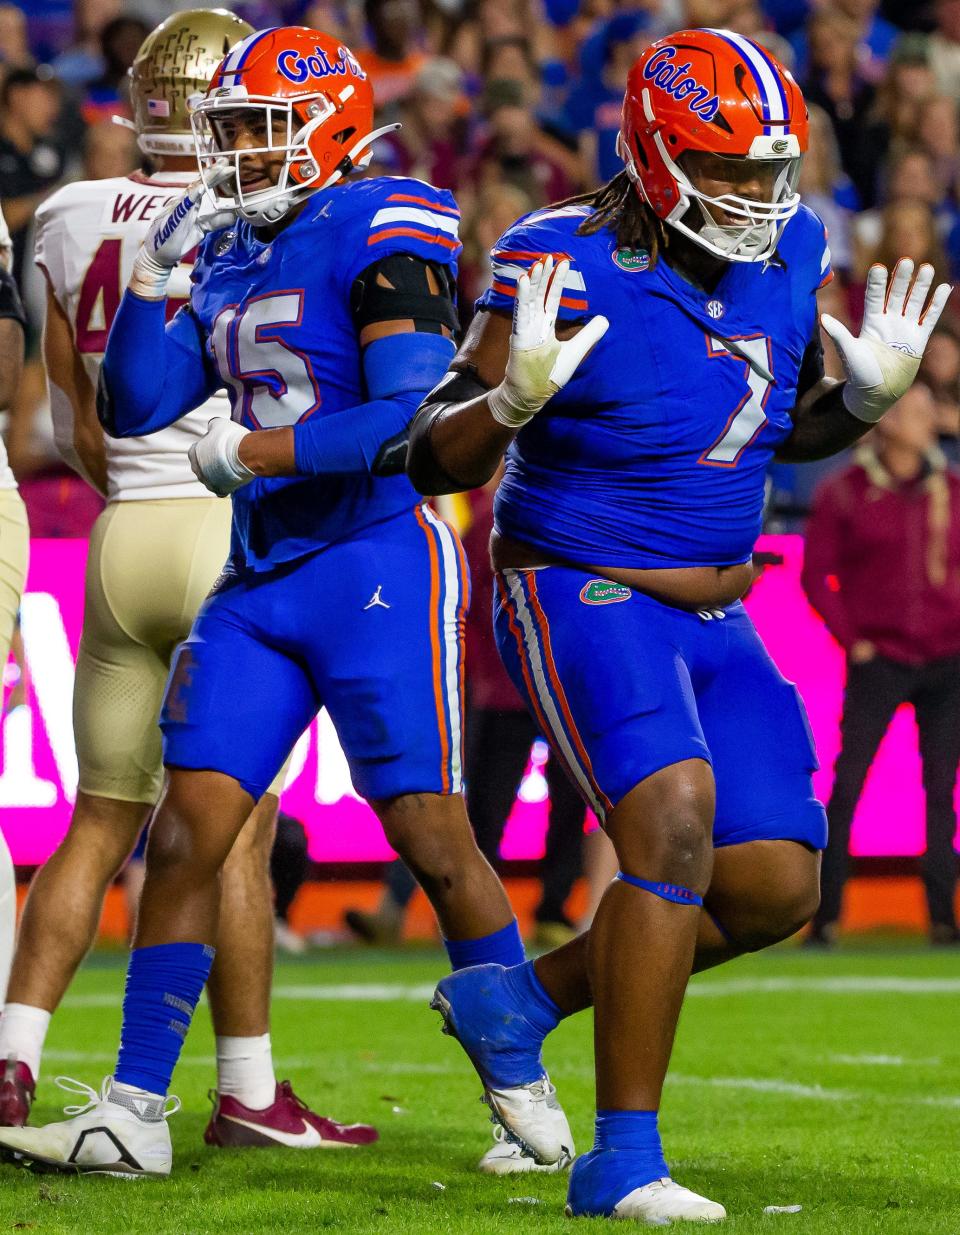 Florida Gators defensive lineman Chris McClellan (7) celebrates his tackle against Florida State Seminoles running back Trey Benson (3) on Steve Spurrier Field at Ben Hill Griffin Stadium in Gainesville, FL on Saturday, November 25, 2023 , during the second half.  Florida State won 24-15. [Doug Engle/Gainesville Sun]